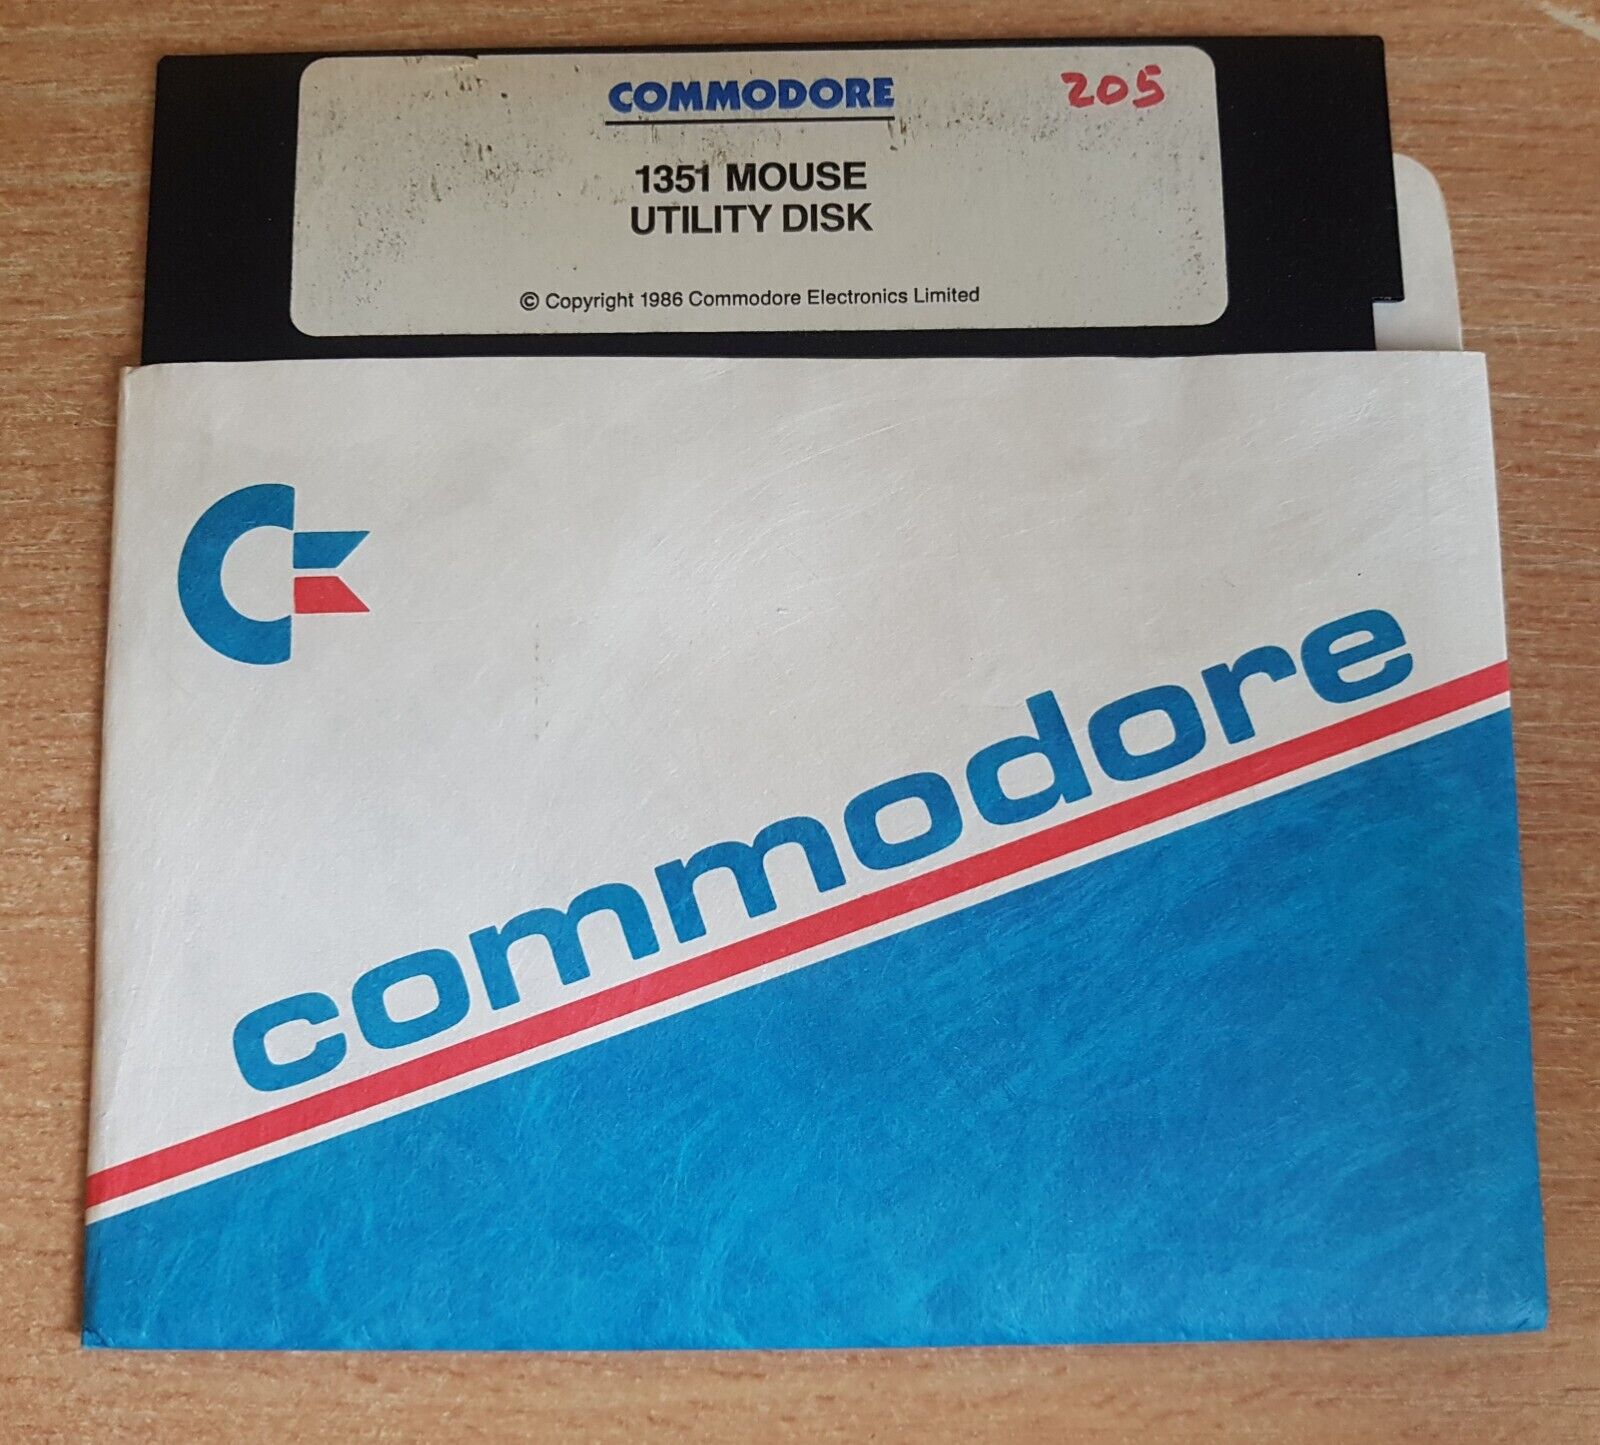 Original COMMODORE 1351 MOUSE UTILITY DISK Genuine part, working 1986, ExRare